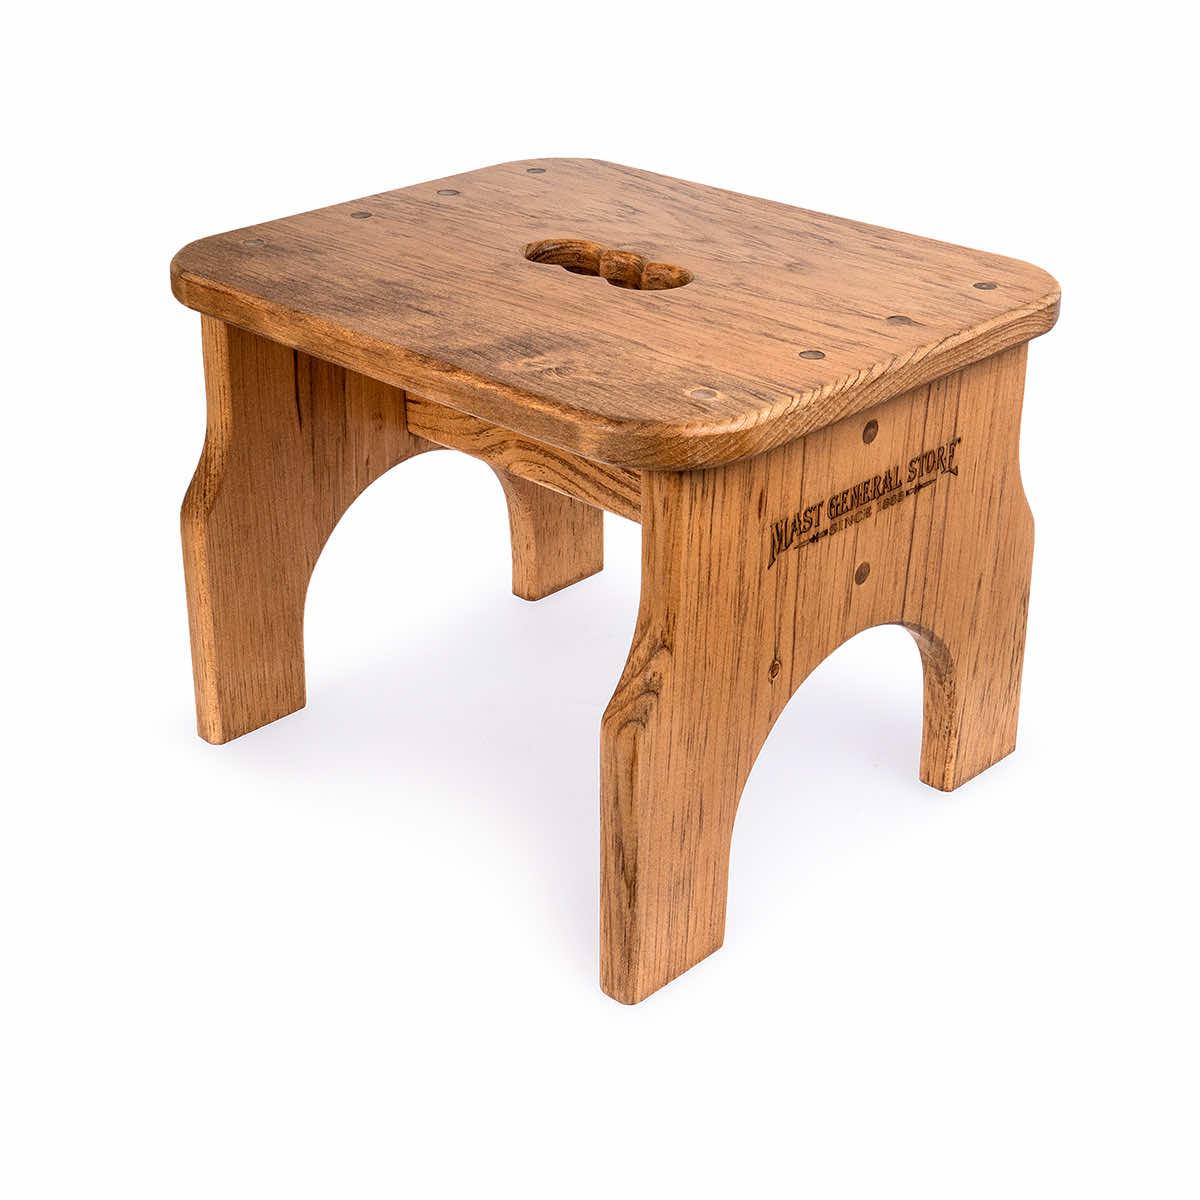 Mast General Store Wooden Foot Stool